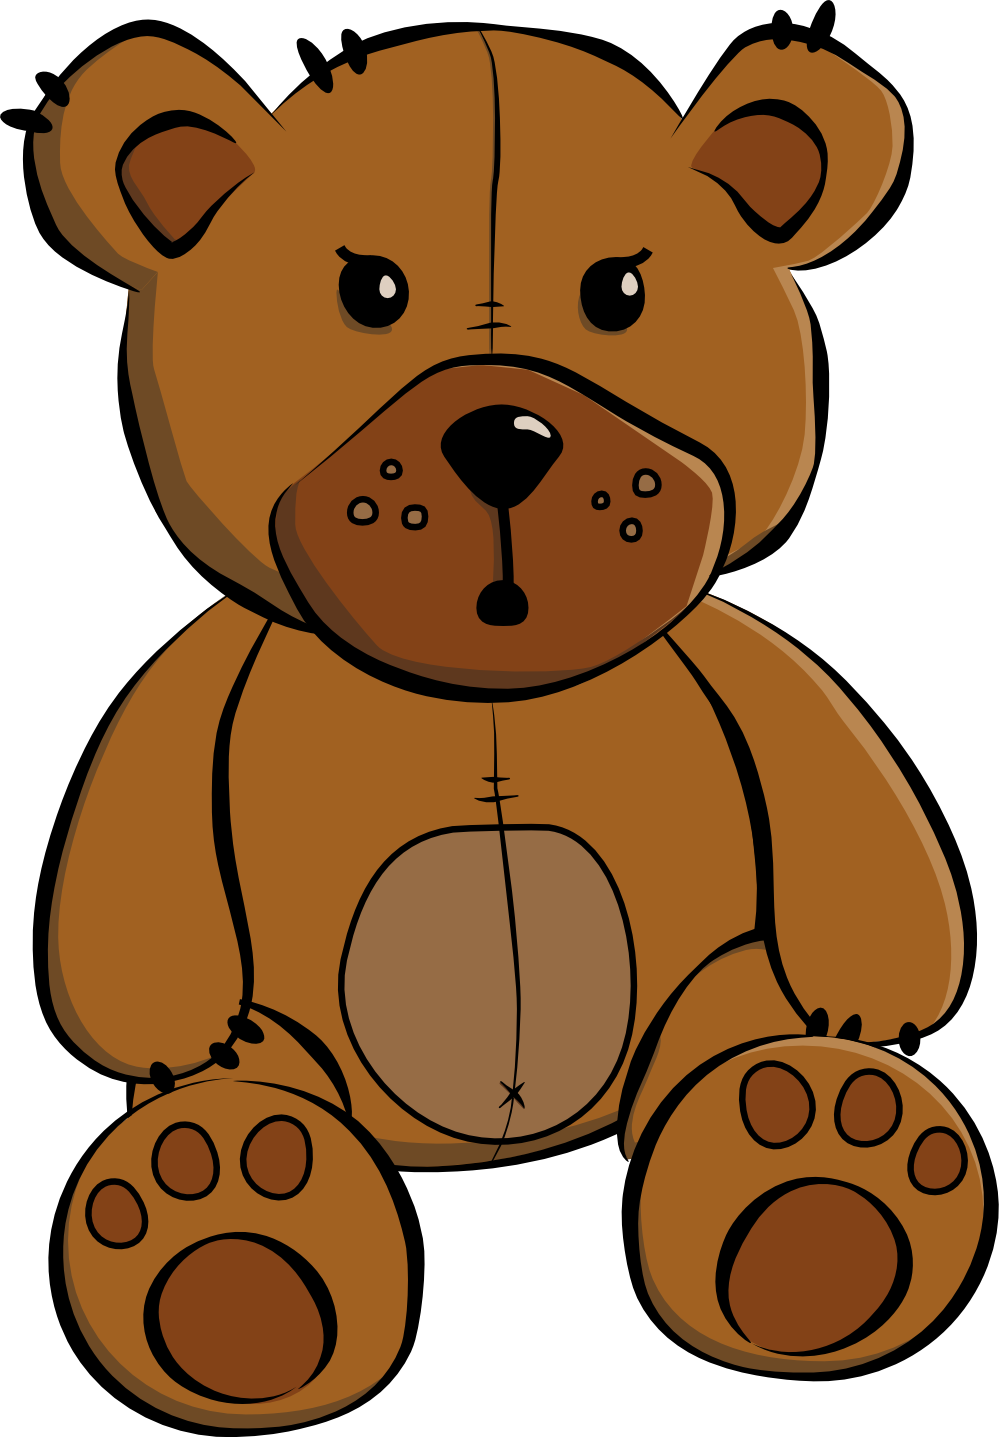 Teddy bear clipart free clipart images 2 - Clipartix